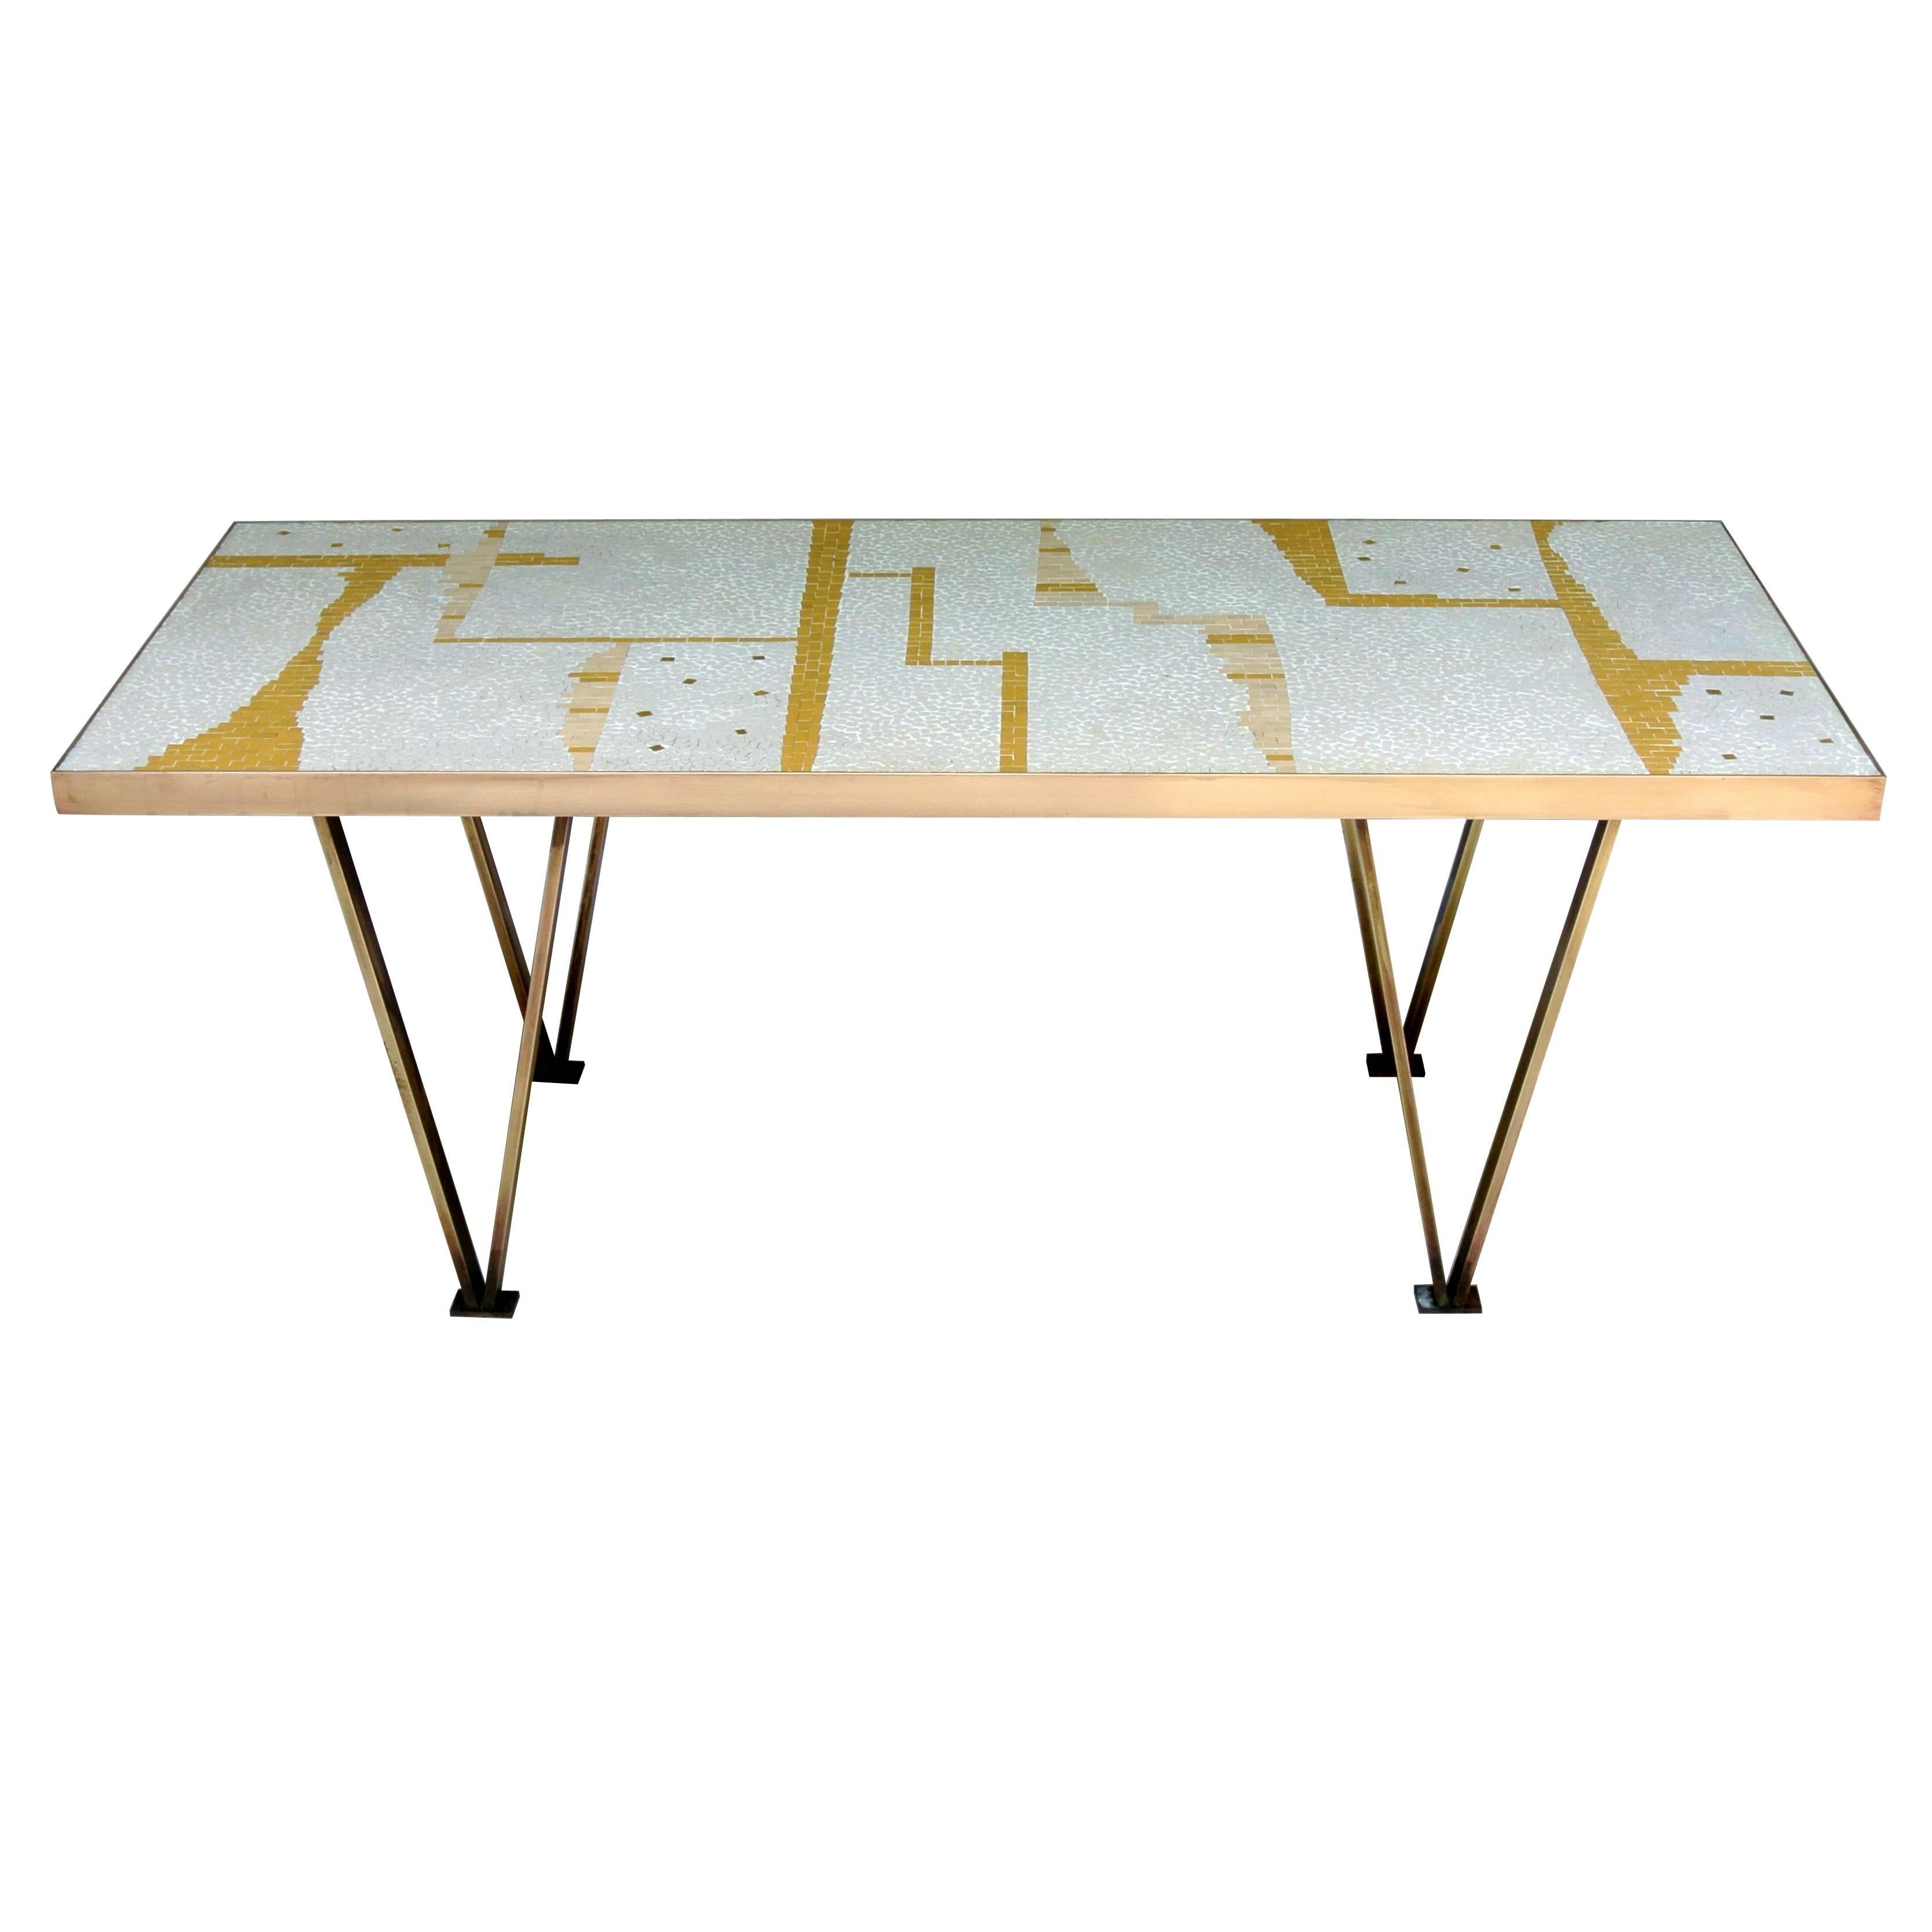 Ceramic tile coffee table handcrafted  bronze framed mid-century from an unknown California studio . 
An abstract mosaic of sienna, umber and alabaster on a background of white tiles. with a scattering of gold mirrored tiles 
The table is in